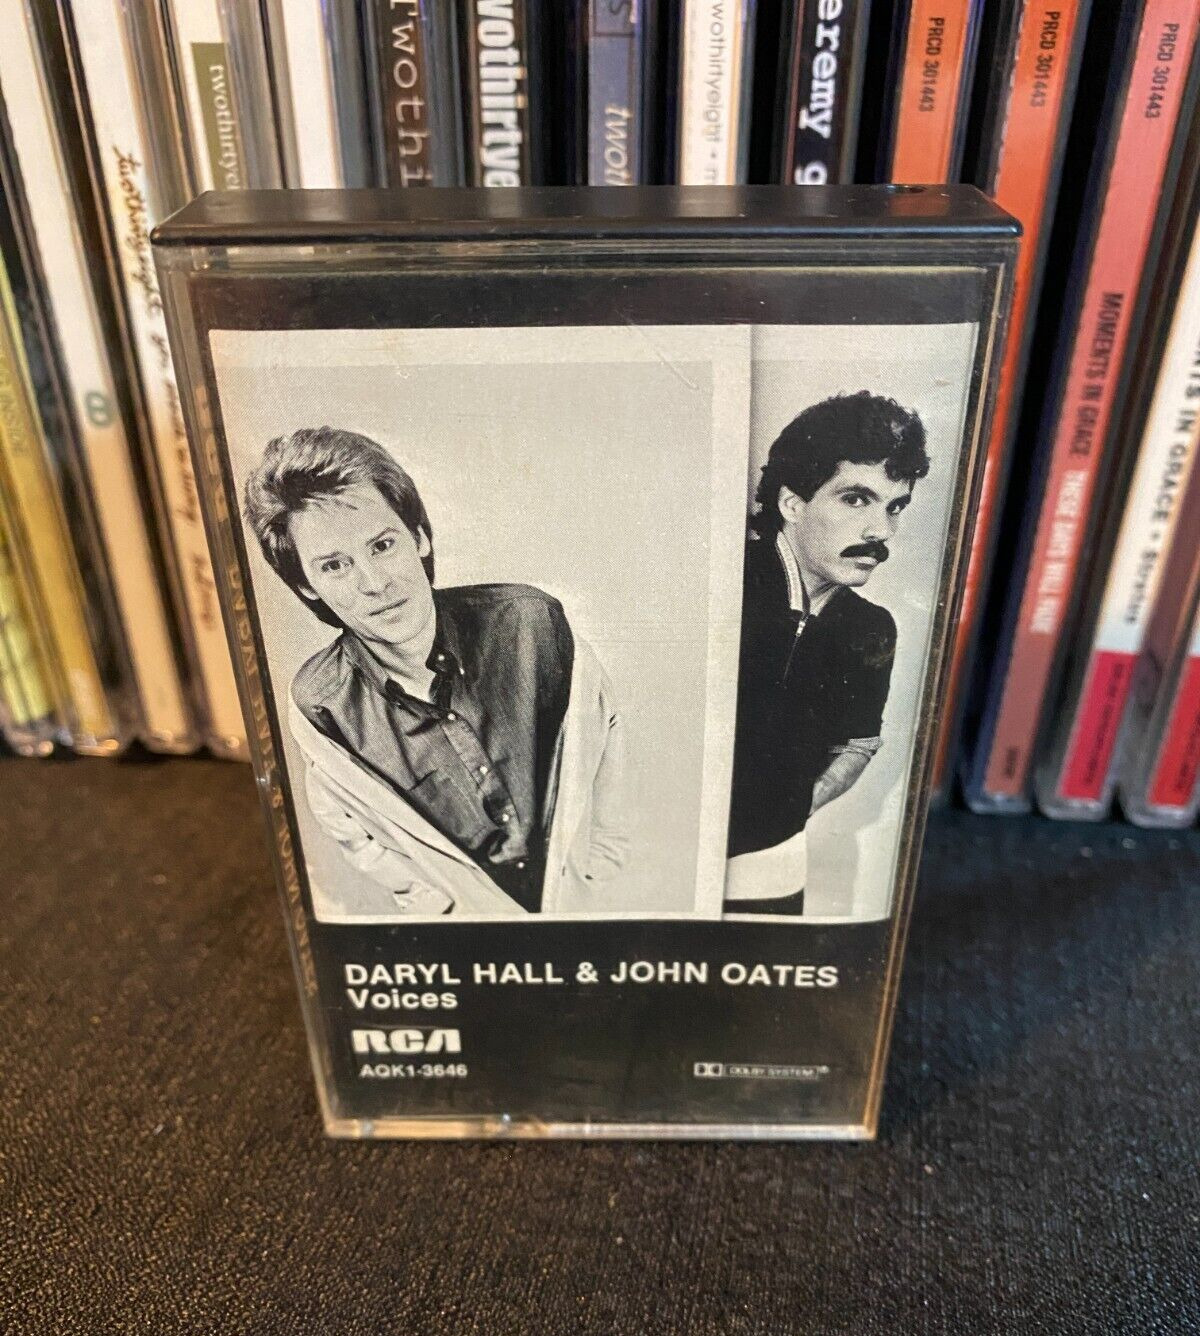 Daryl Hall & John Oates - Voices Cassette Tape/RCA 1980 Vintage, Tested